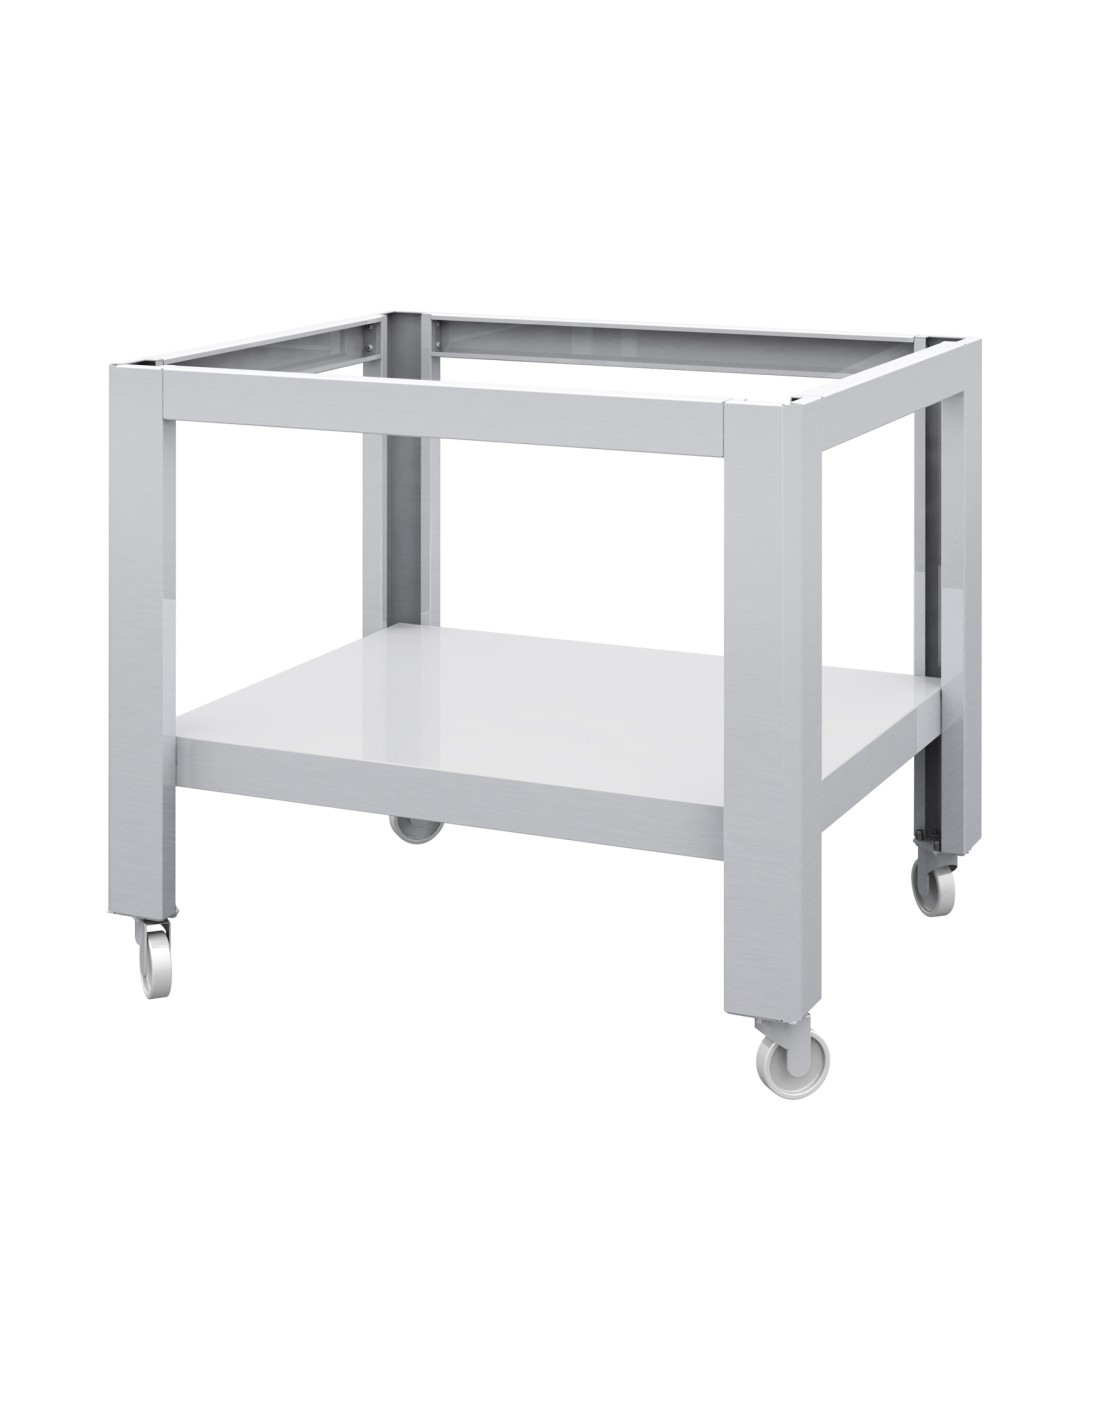 Support in stainless steel - Dimensions cm 146 x 128 x 99 h